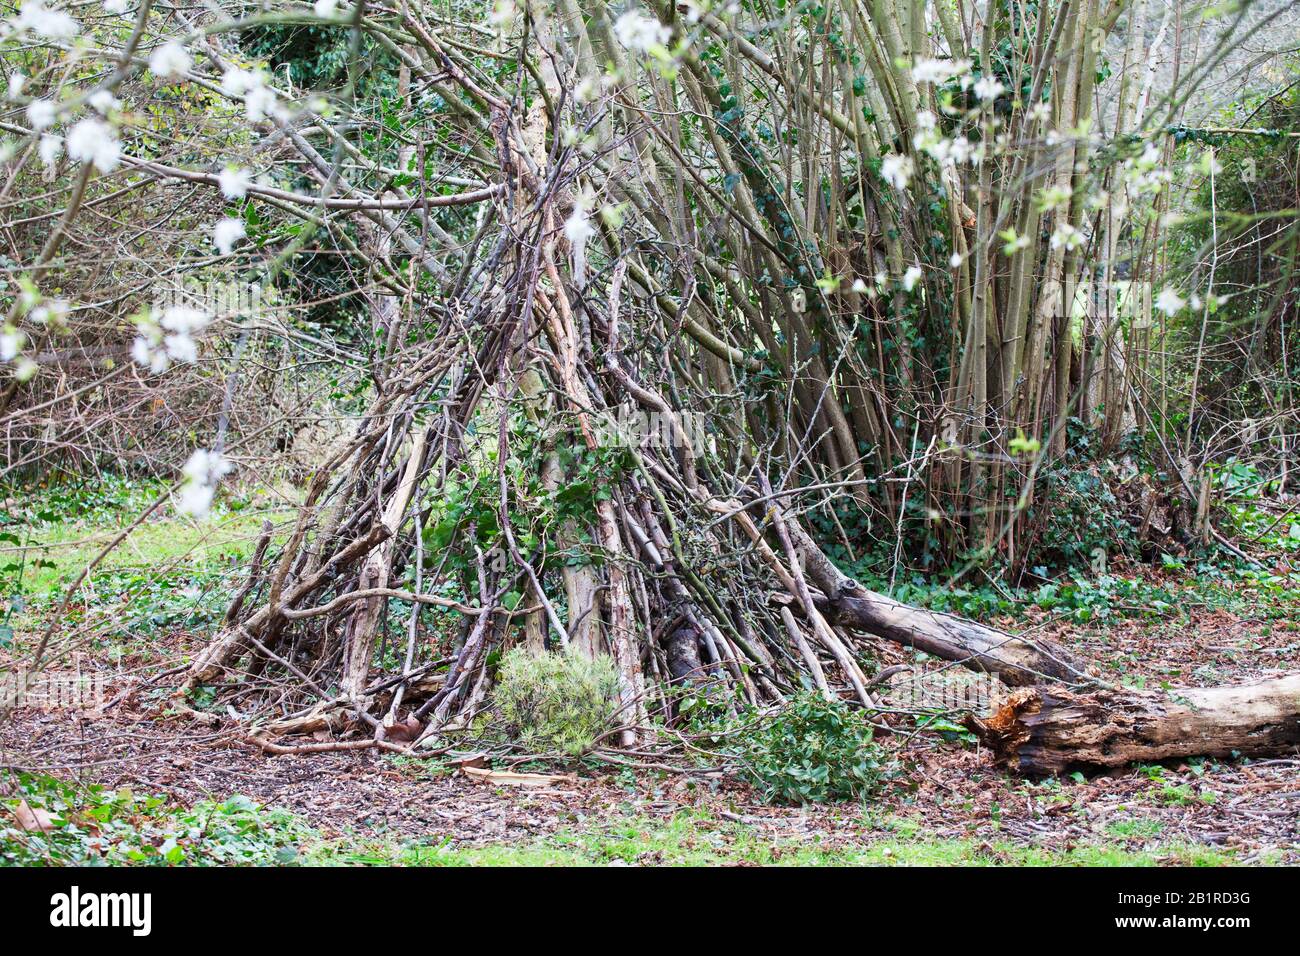 A small den built from fallen and cut branches, in a woodland setting. Stock Photo